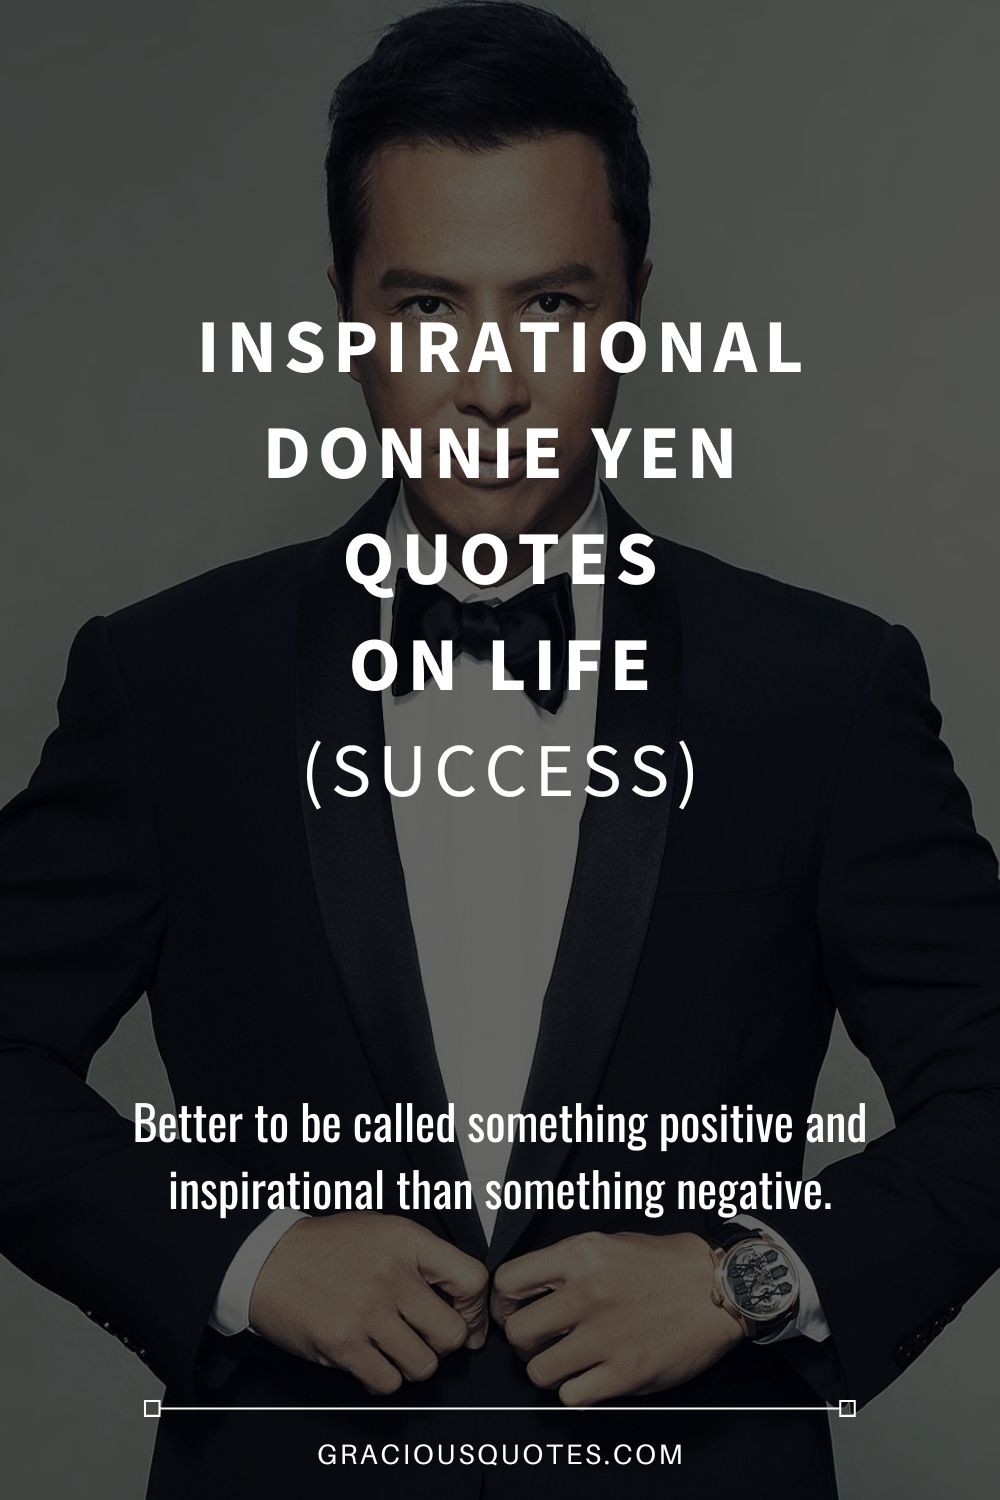 Inspirational Donnie Yen Quotes on Life (SUCCESS) - Gracious Quotes